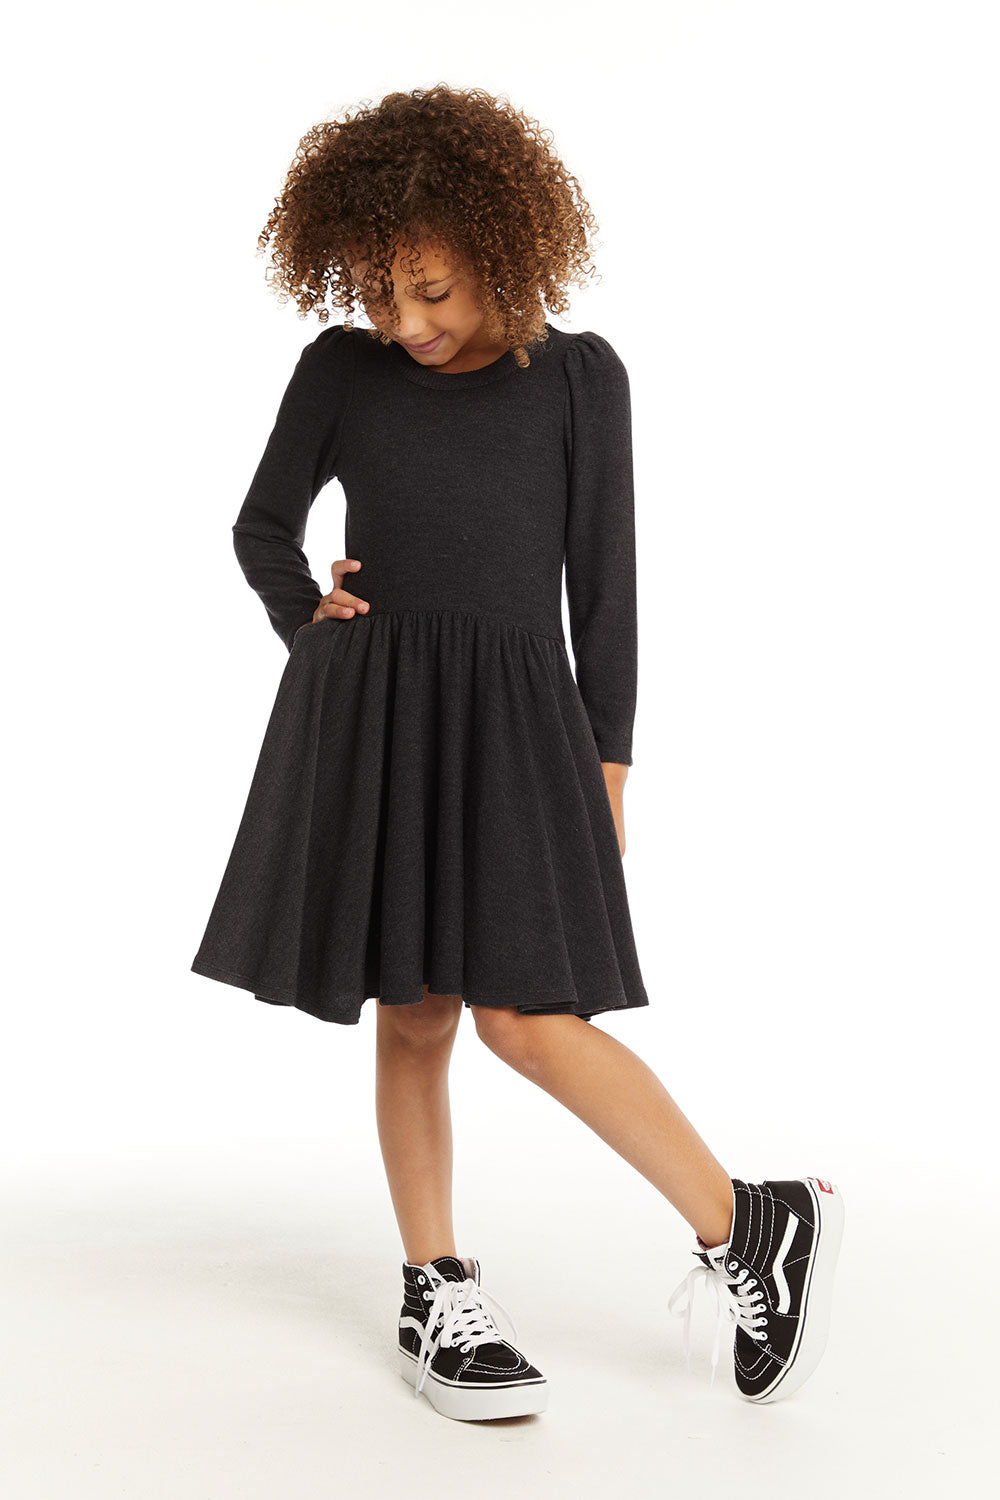 Puff Black Licorice Long Sleeve Dress with Twirl Skirt GIRLS chaserbrand